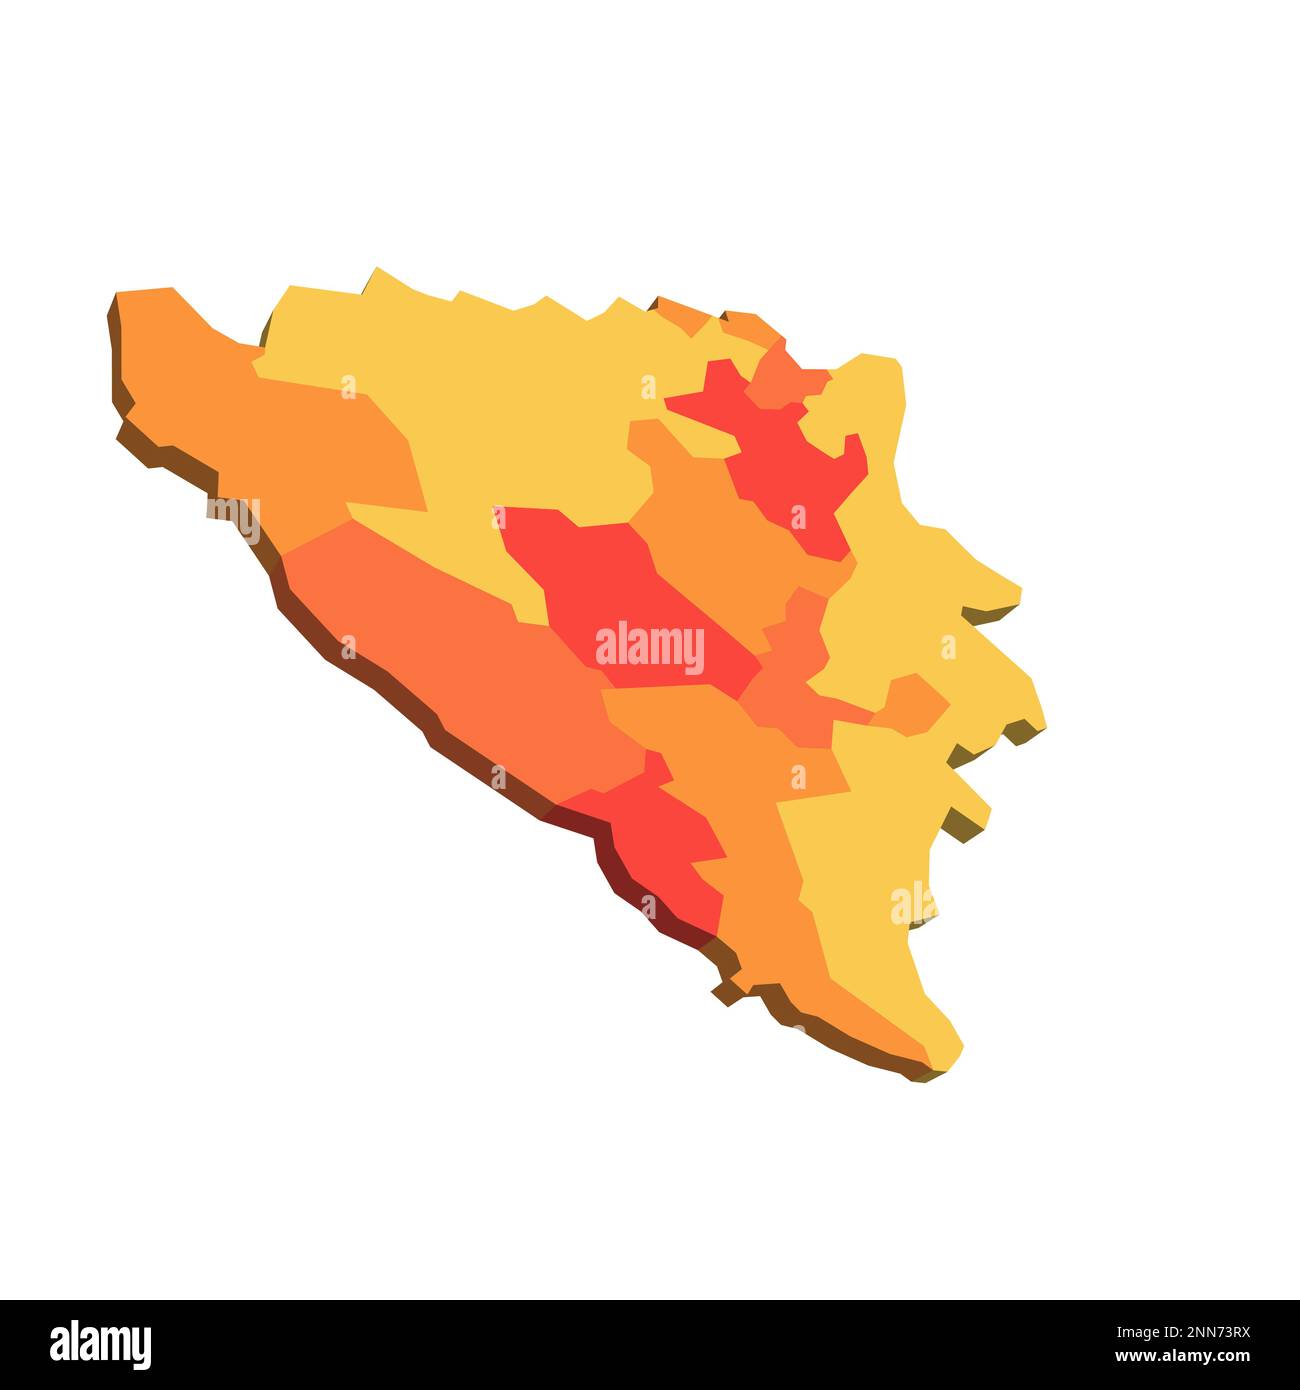 Bosnia and Herzegovina political map of administrative divisions - cantons of Federation of Bosnia and Herzegovina and Republika Srpska. Map with labels. Stock Vector